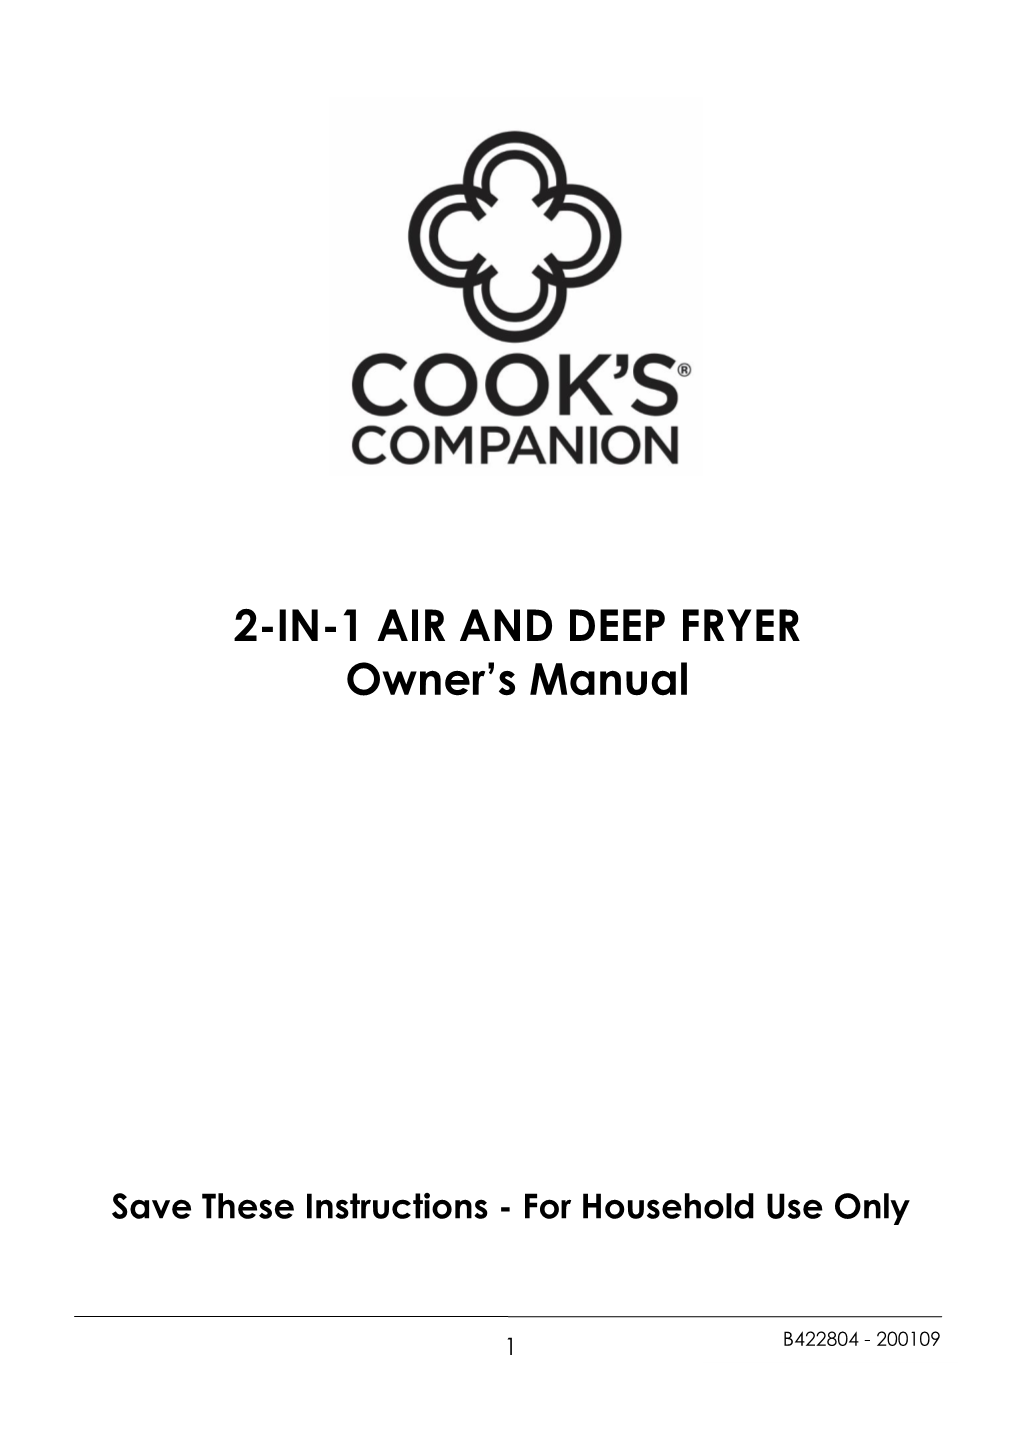 2-IN-1 AIR and DEEP FRYER Owner's Manual